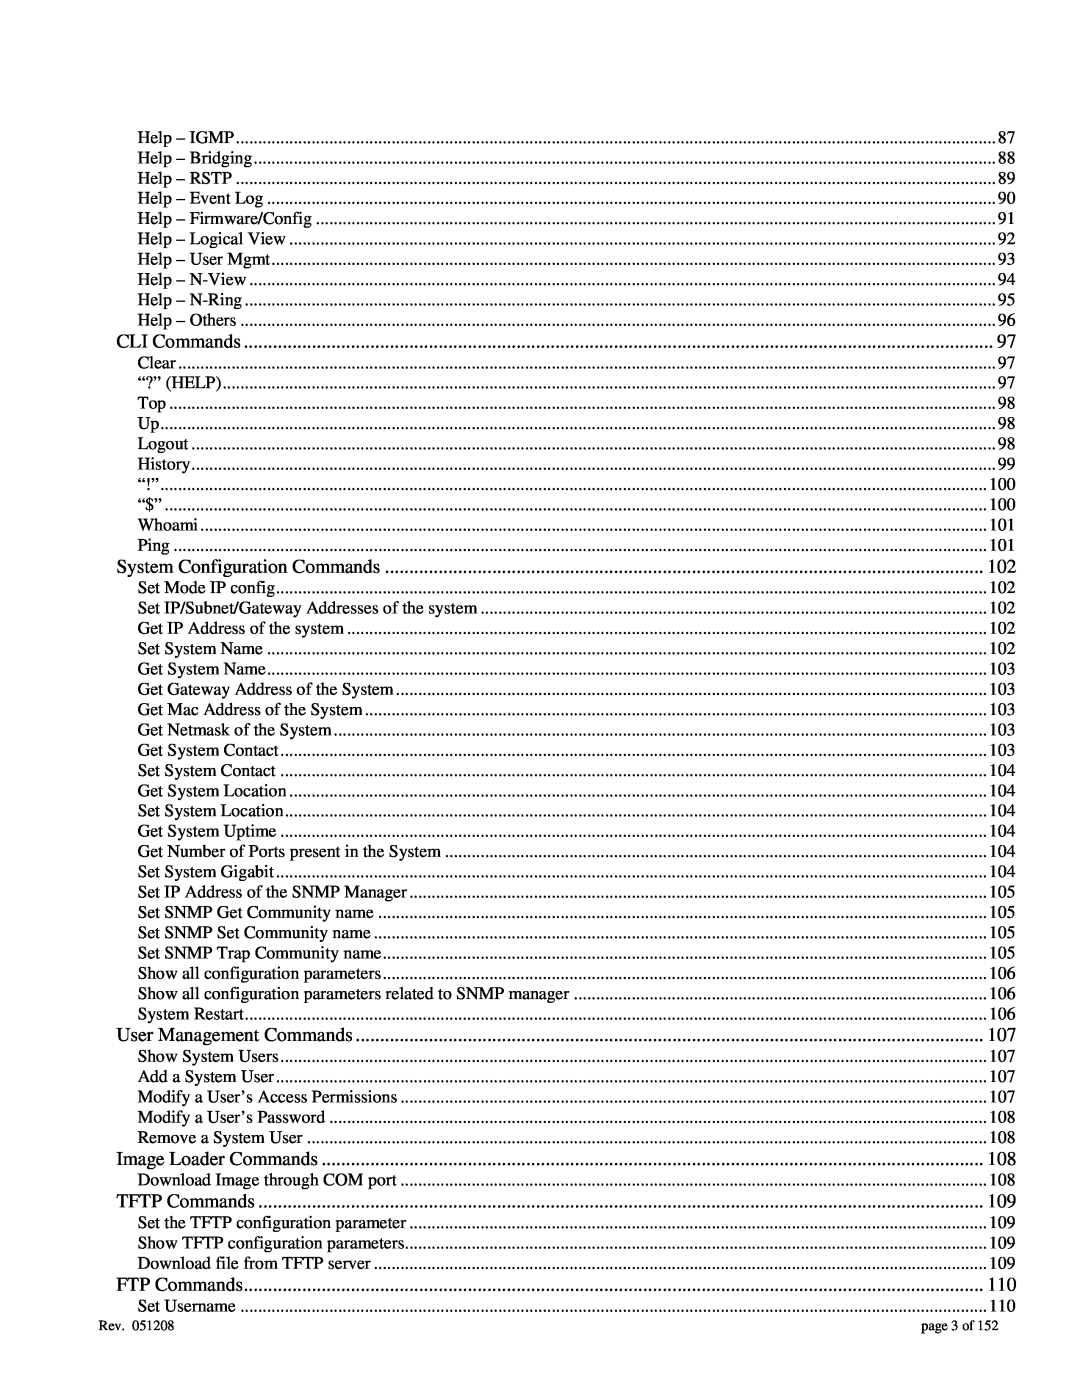 Gigabyte 7014 user manual page 3 of 